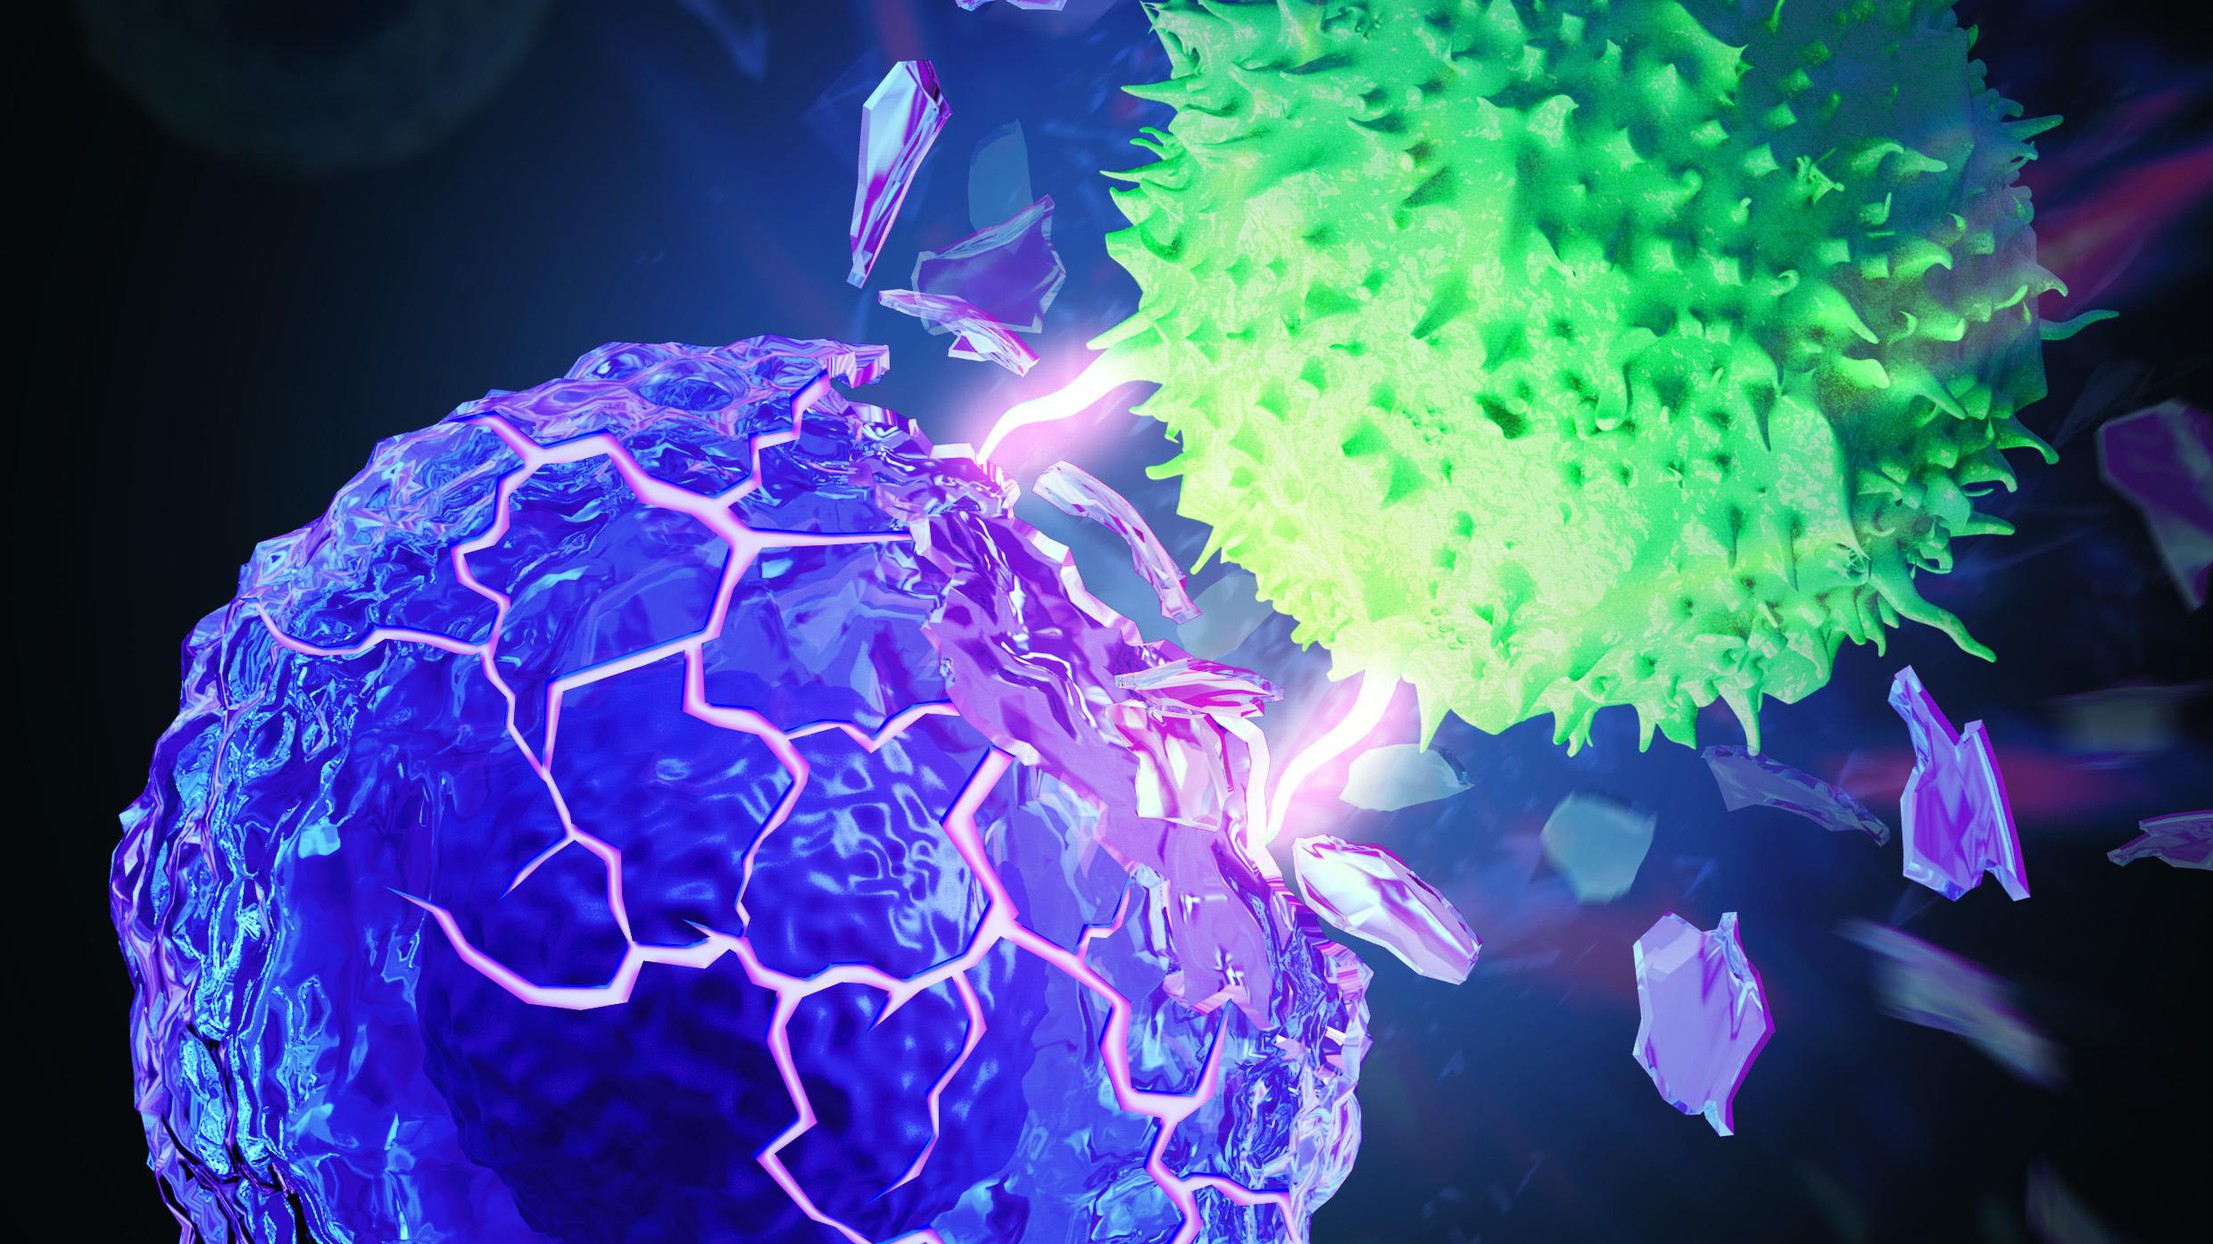 Rigidifying cancer cells for better immunotherapy